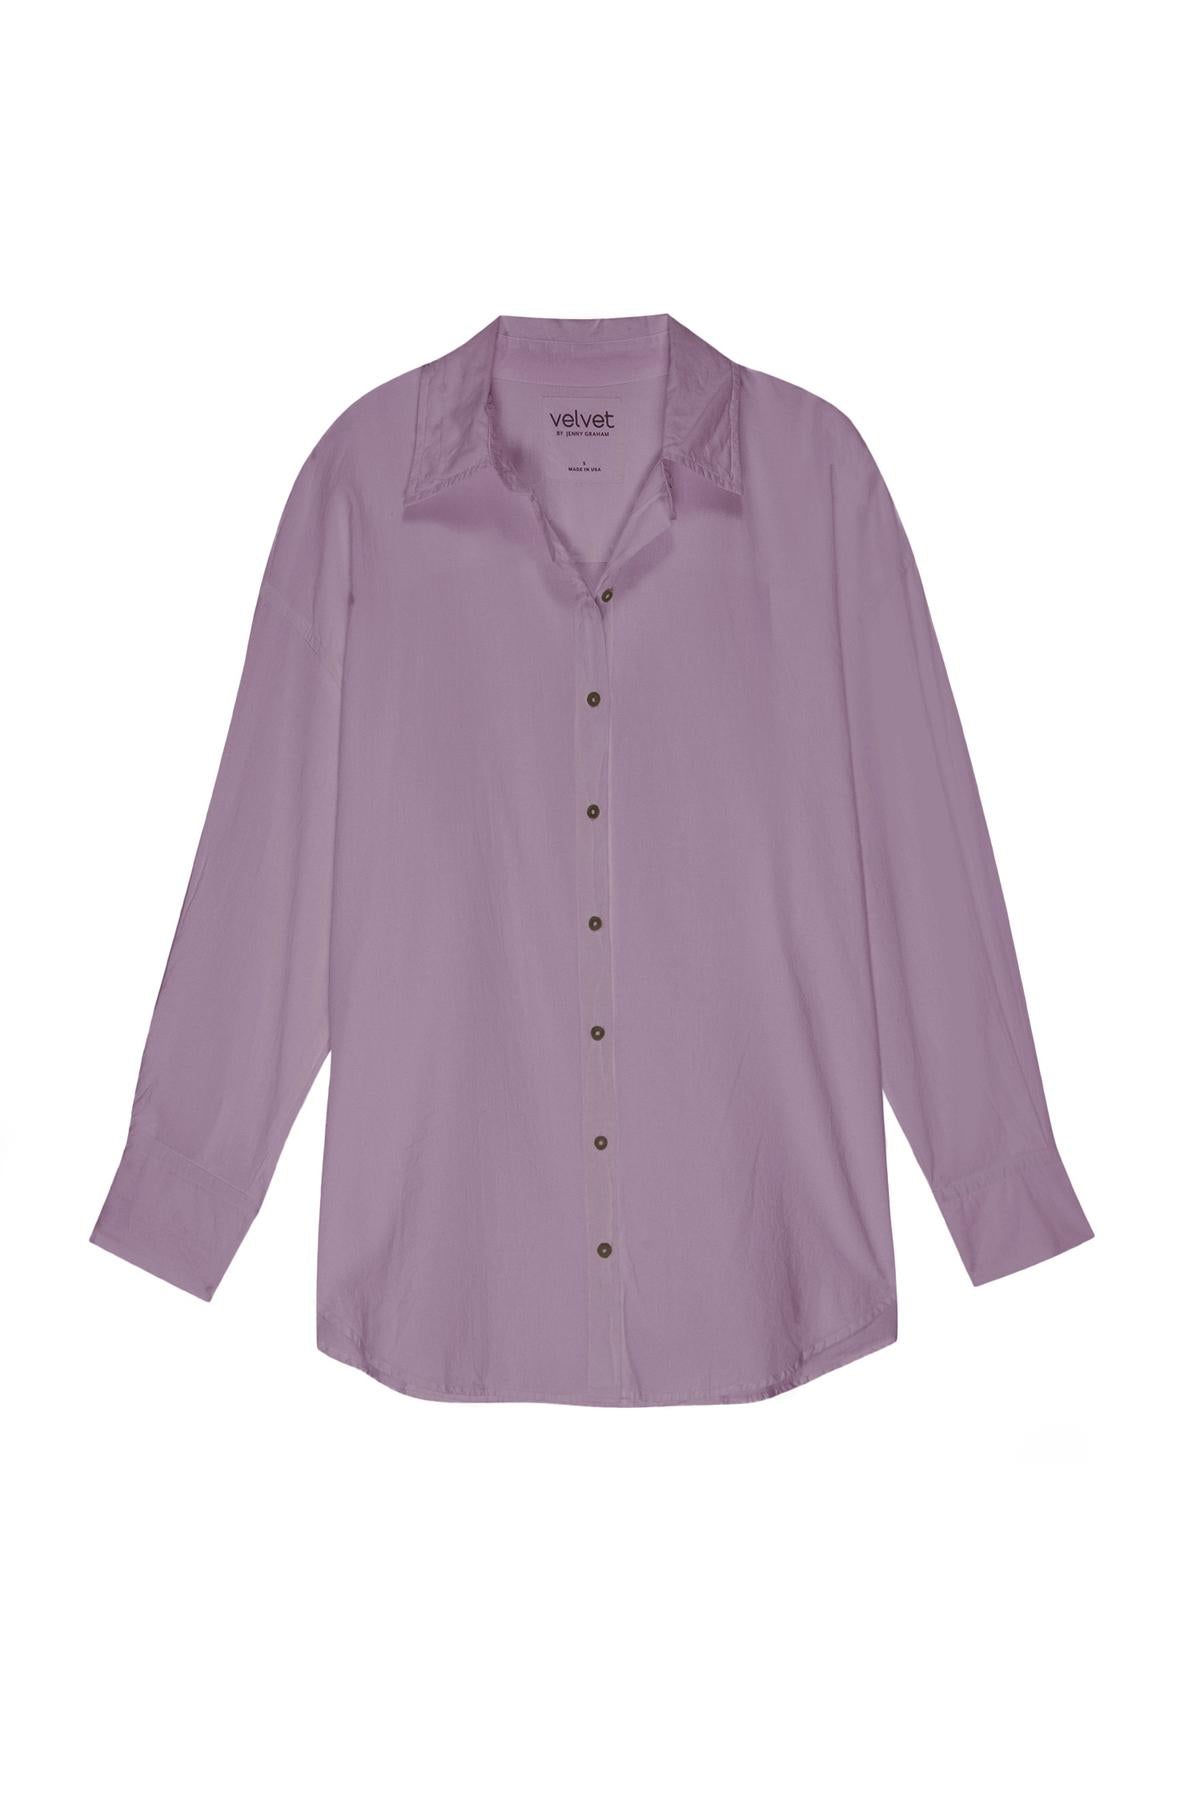 An oversized women's Velvet by Jenny Graham REDONDO BUTTON-UP SHIRT with a borrowed-from-the-boys silhouette and buttons down the front.-35783066222785